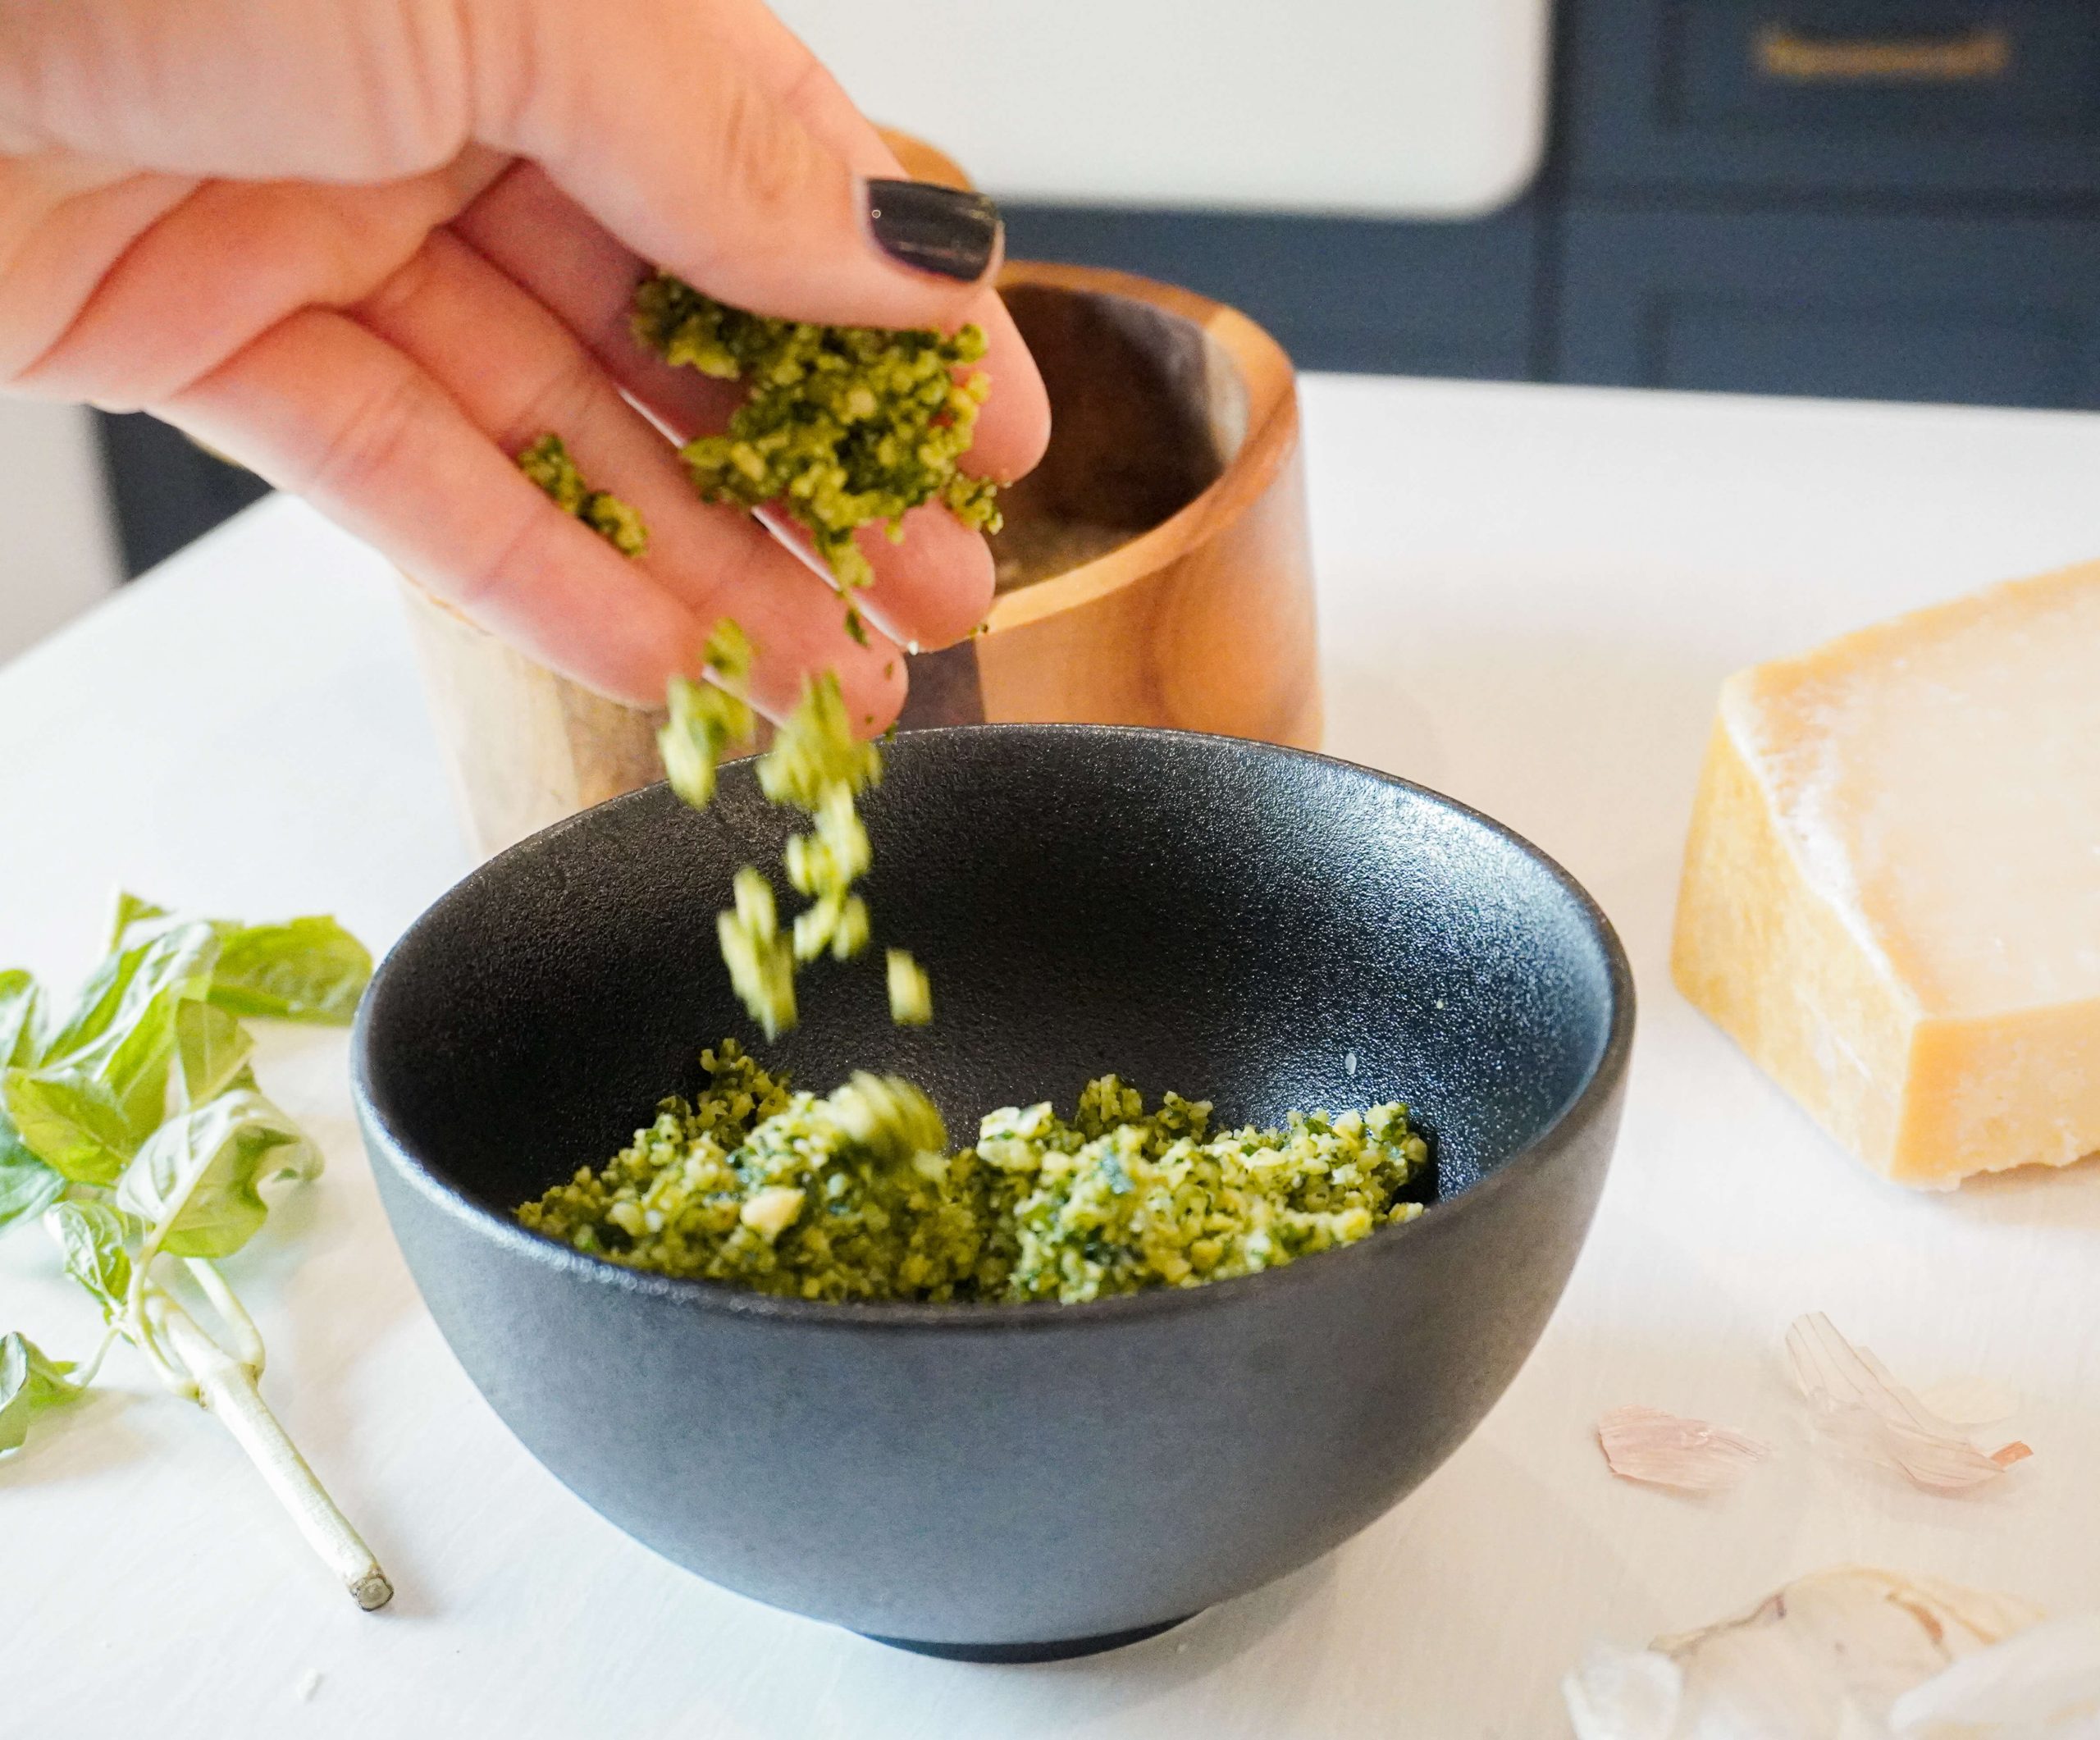 dry pesto being shown in hands